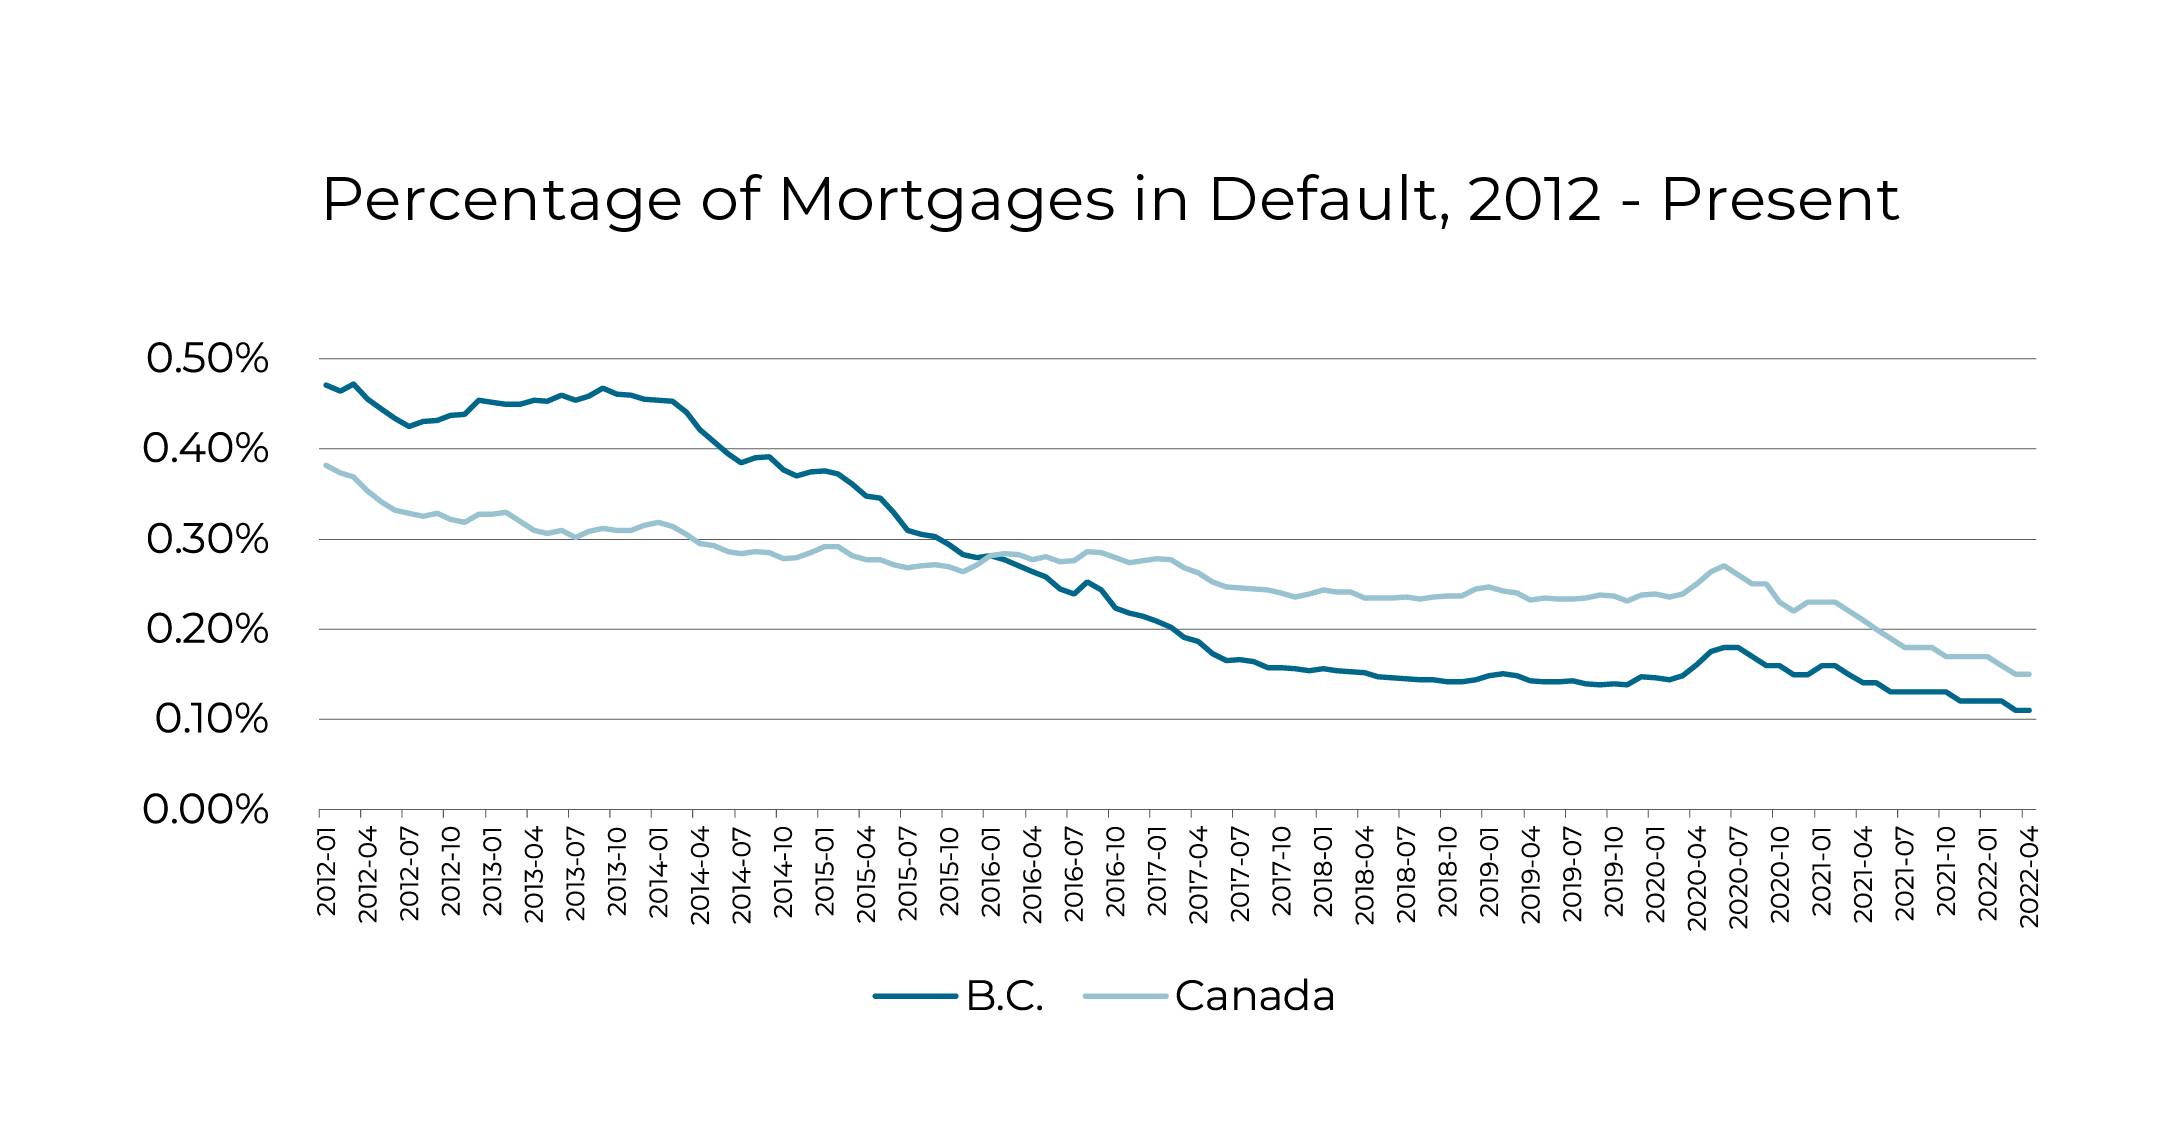 Percentage of Mortgages in Default, 2012 - Present